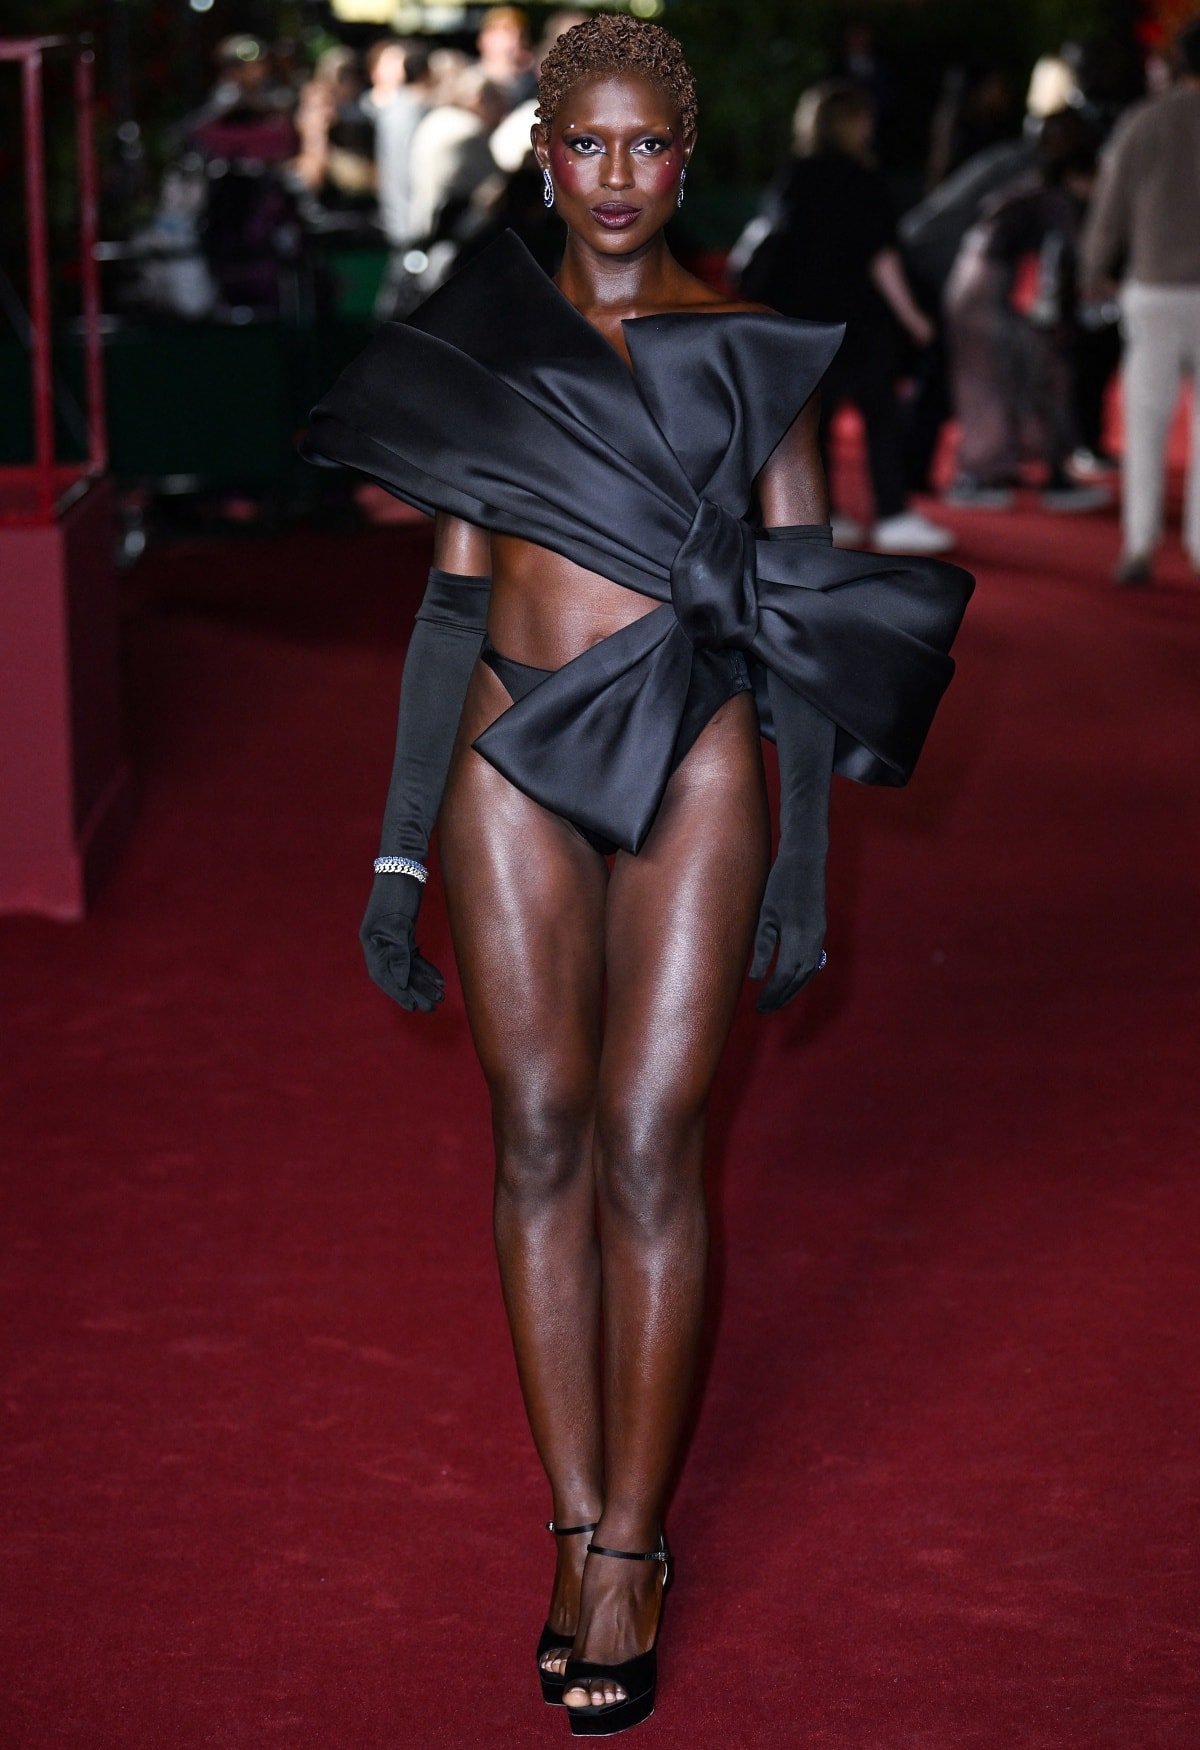 Jodie Turner-Smith making a bold fashion statement in Viktor & Rolf Fall 2023 Haute Couture and Rene Caovilla Anastasia platform heels